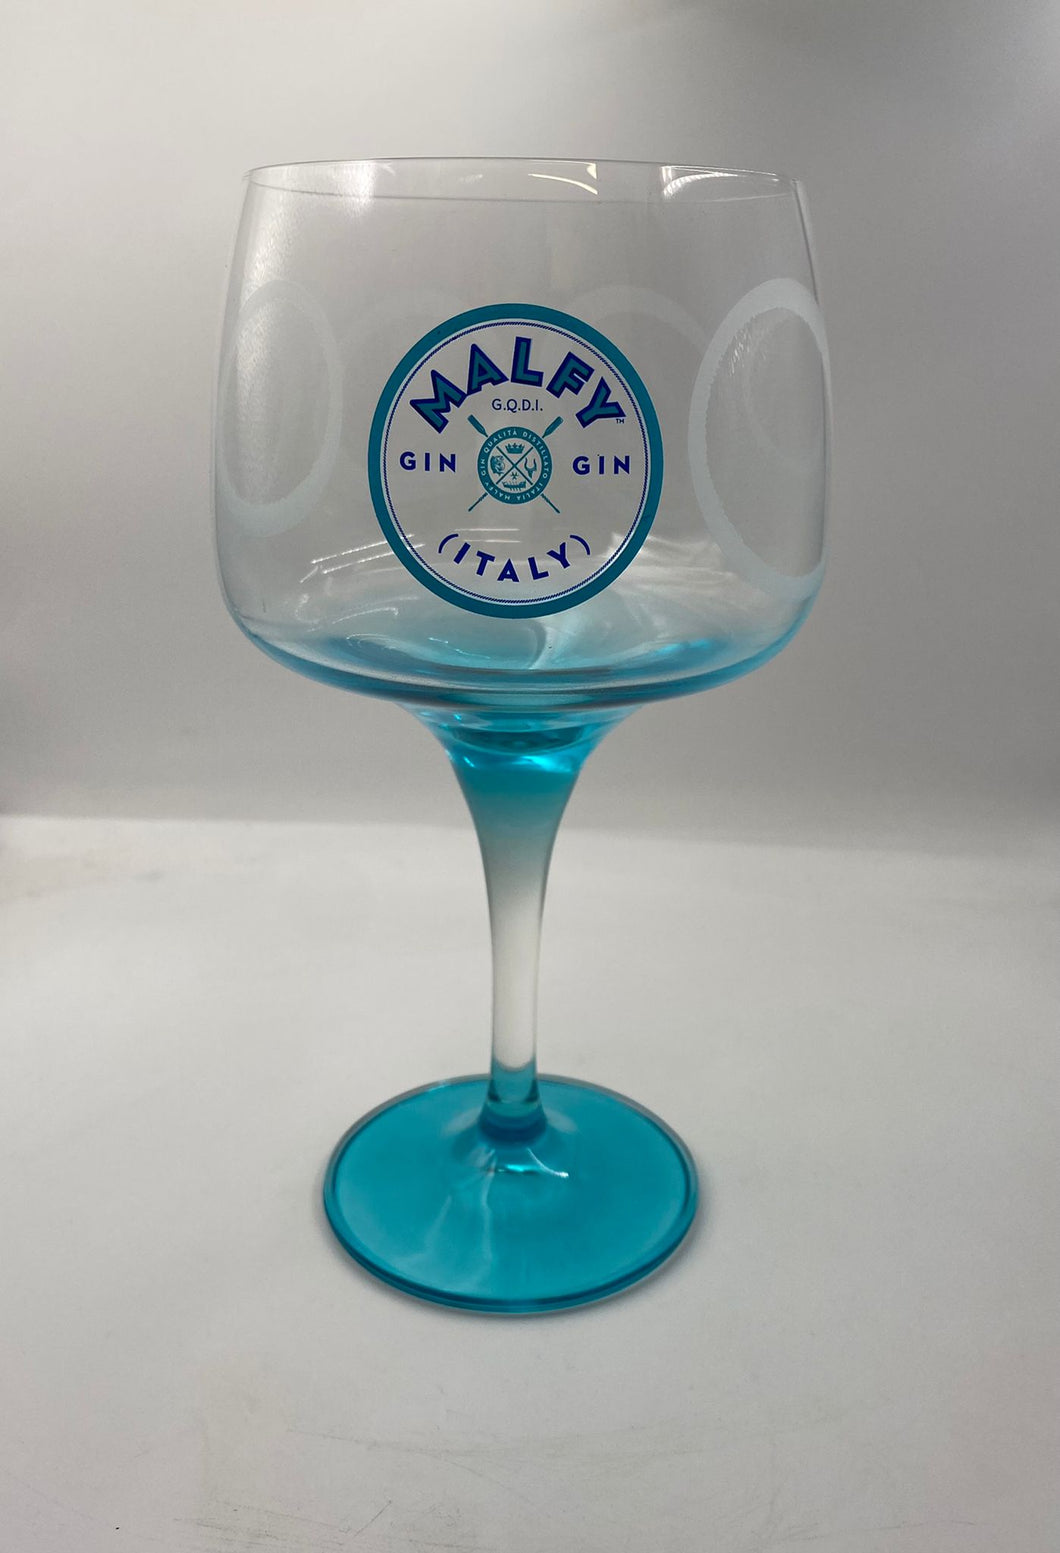 MALFY GIN BALLOON STYLE COPA GLASS - NEW 100% GENUINE ARTICLE - 62cl